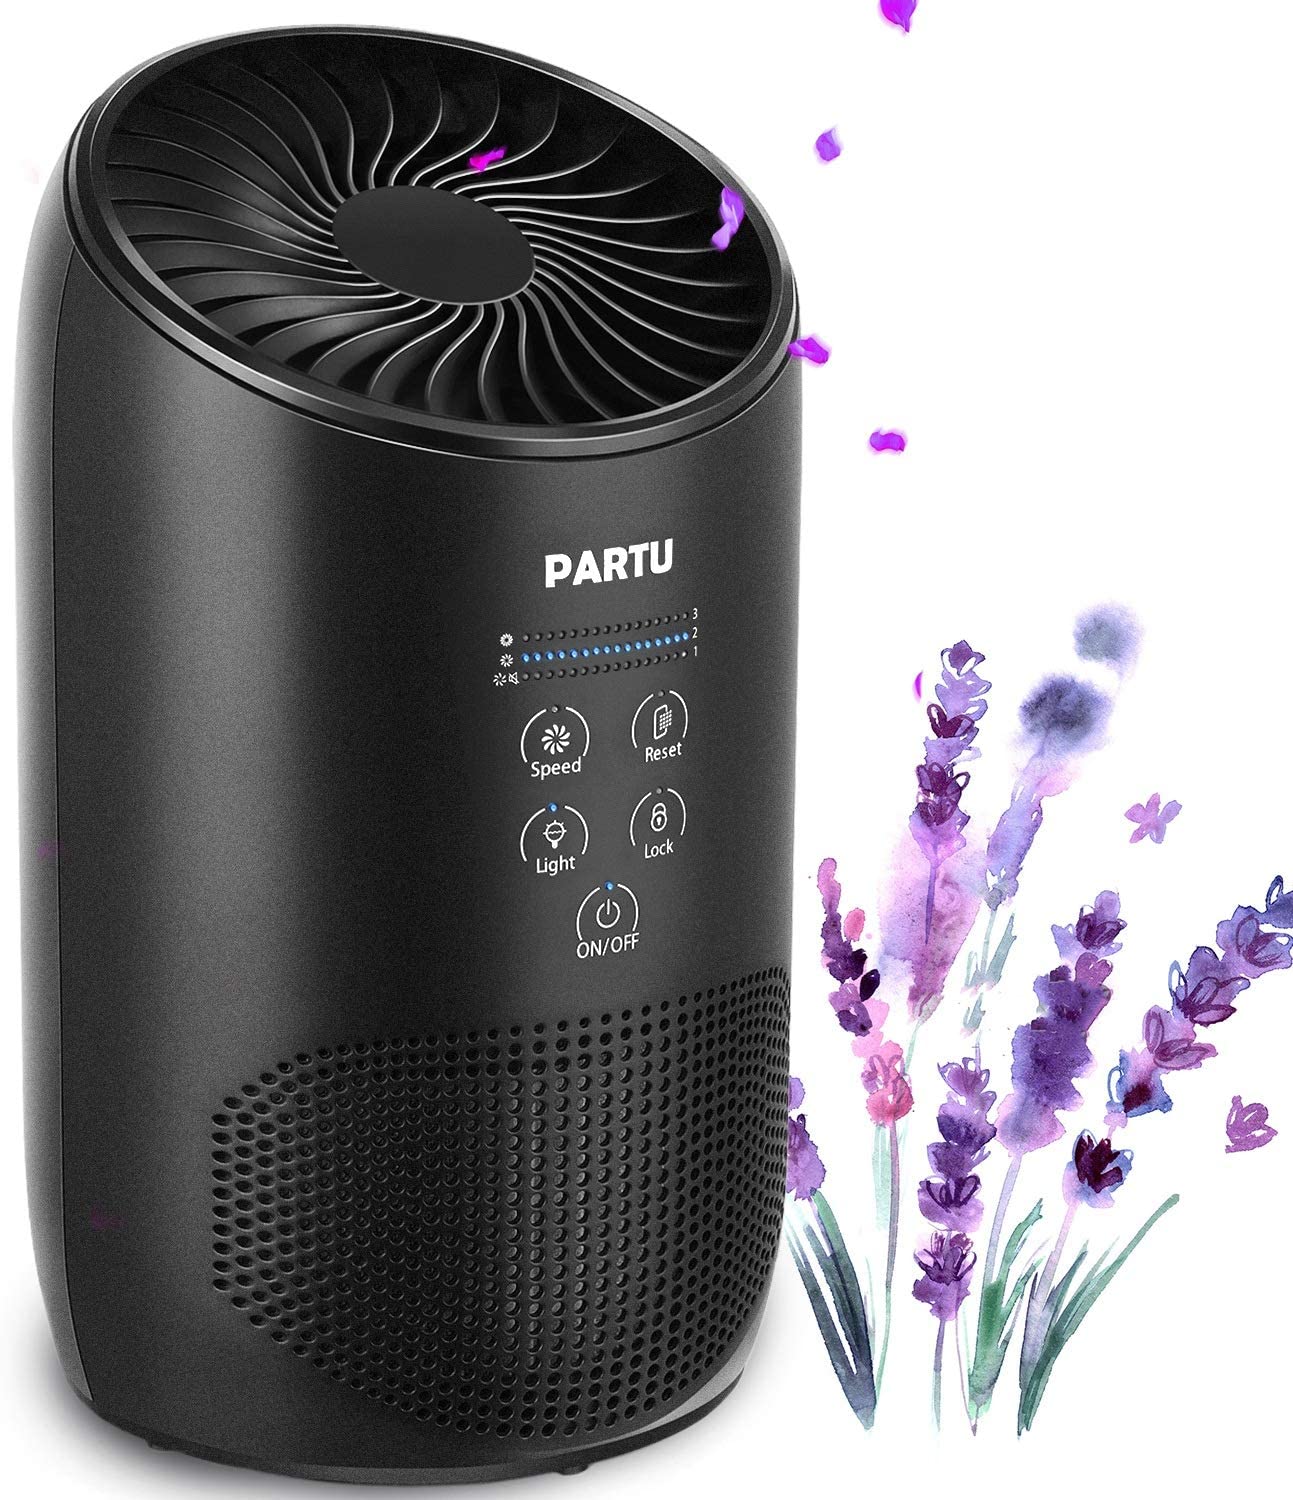 Review of PARTU HEPA Air Purifier - Smoke Air Purifiers for Home with Fragrance Sponge